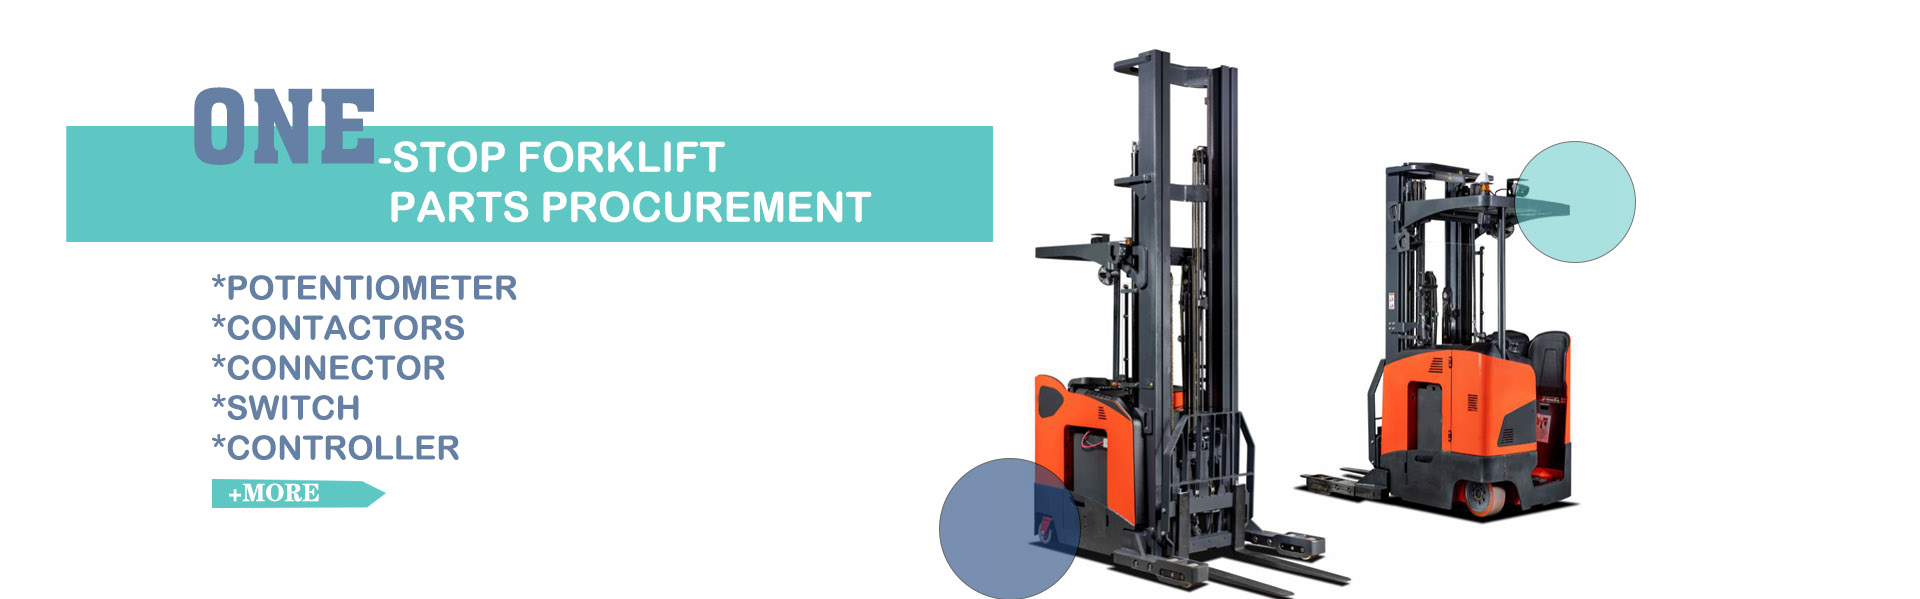 Forklift accessories
One-stop forklift parts supplier